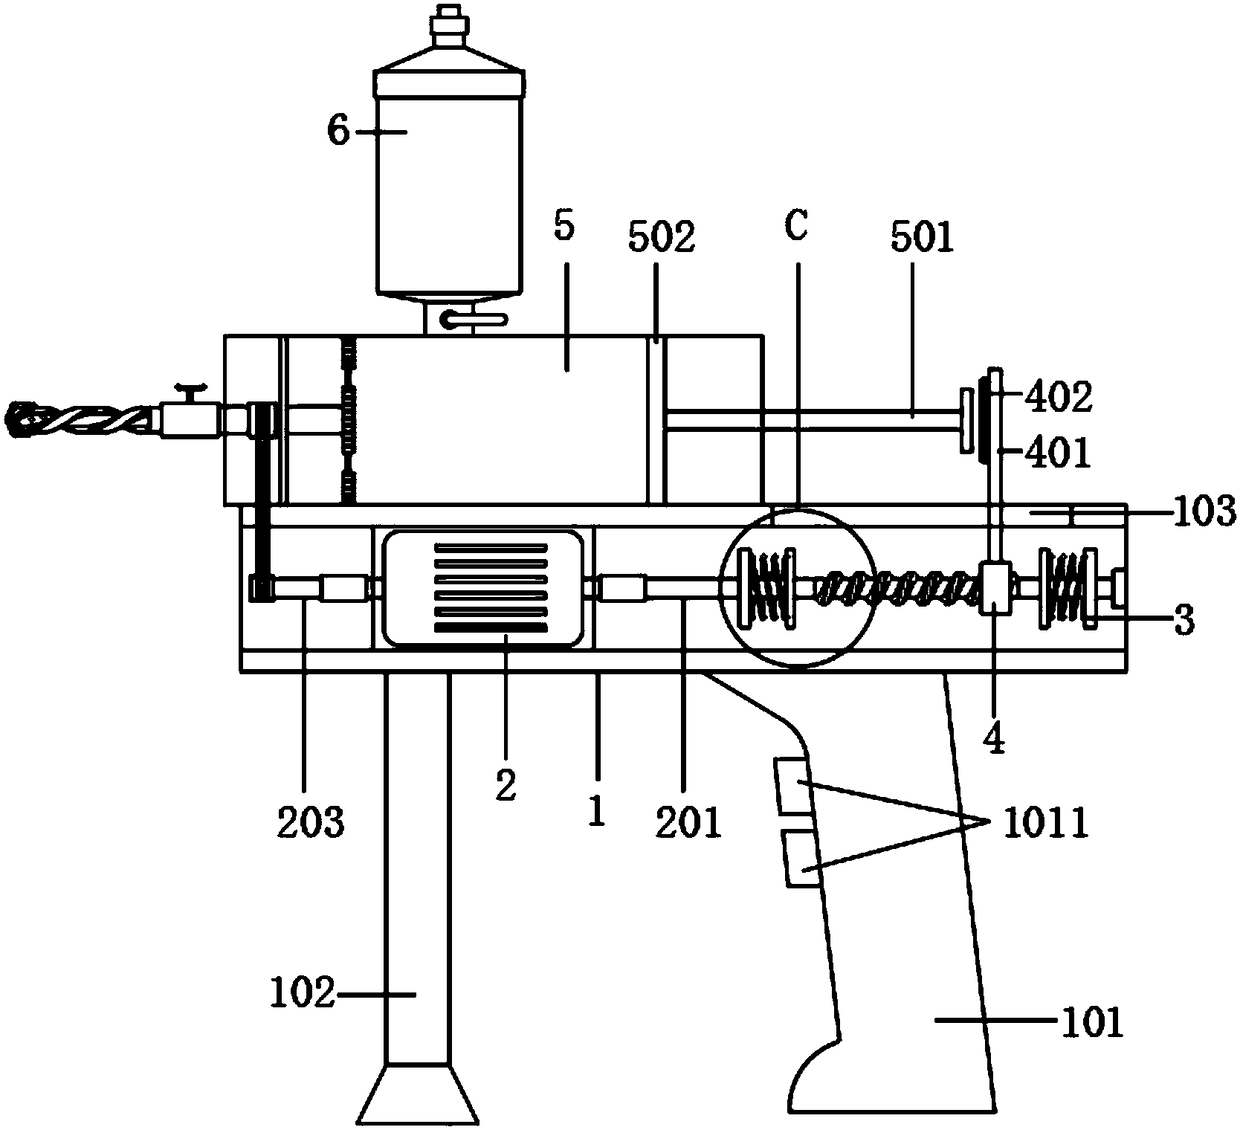 Trunk injector for injecting disease-treating chemical into trunk